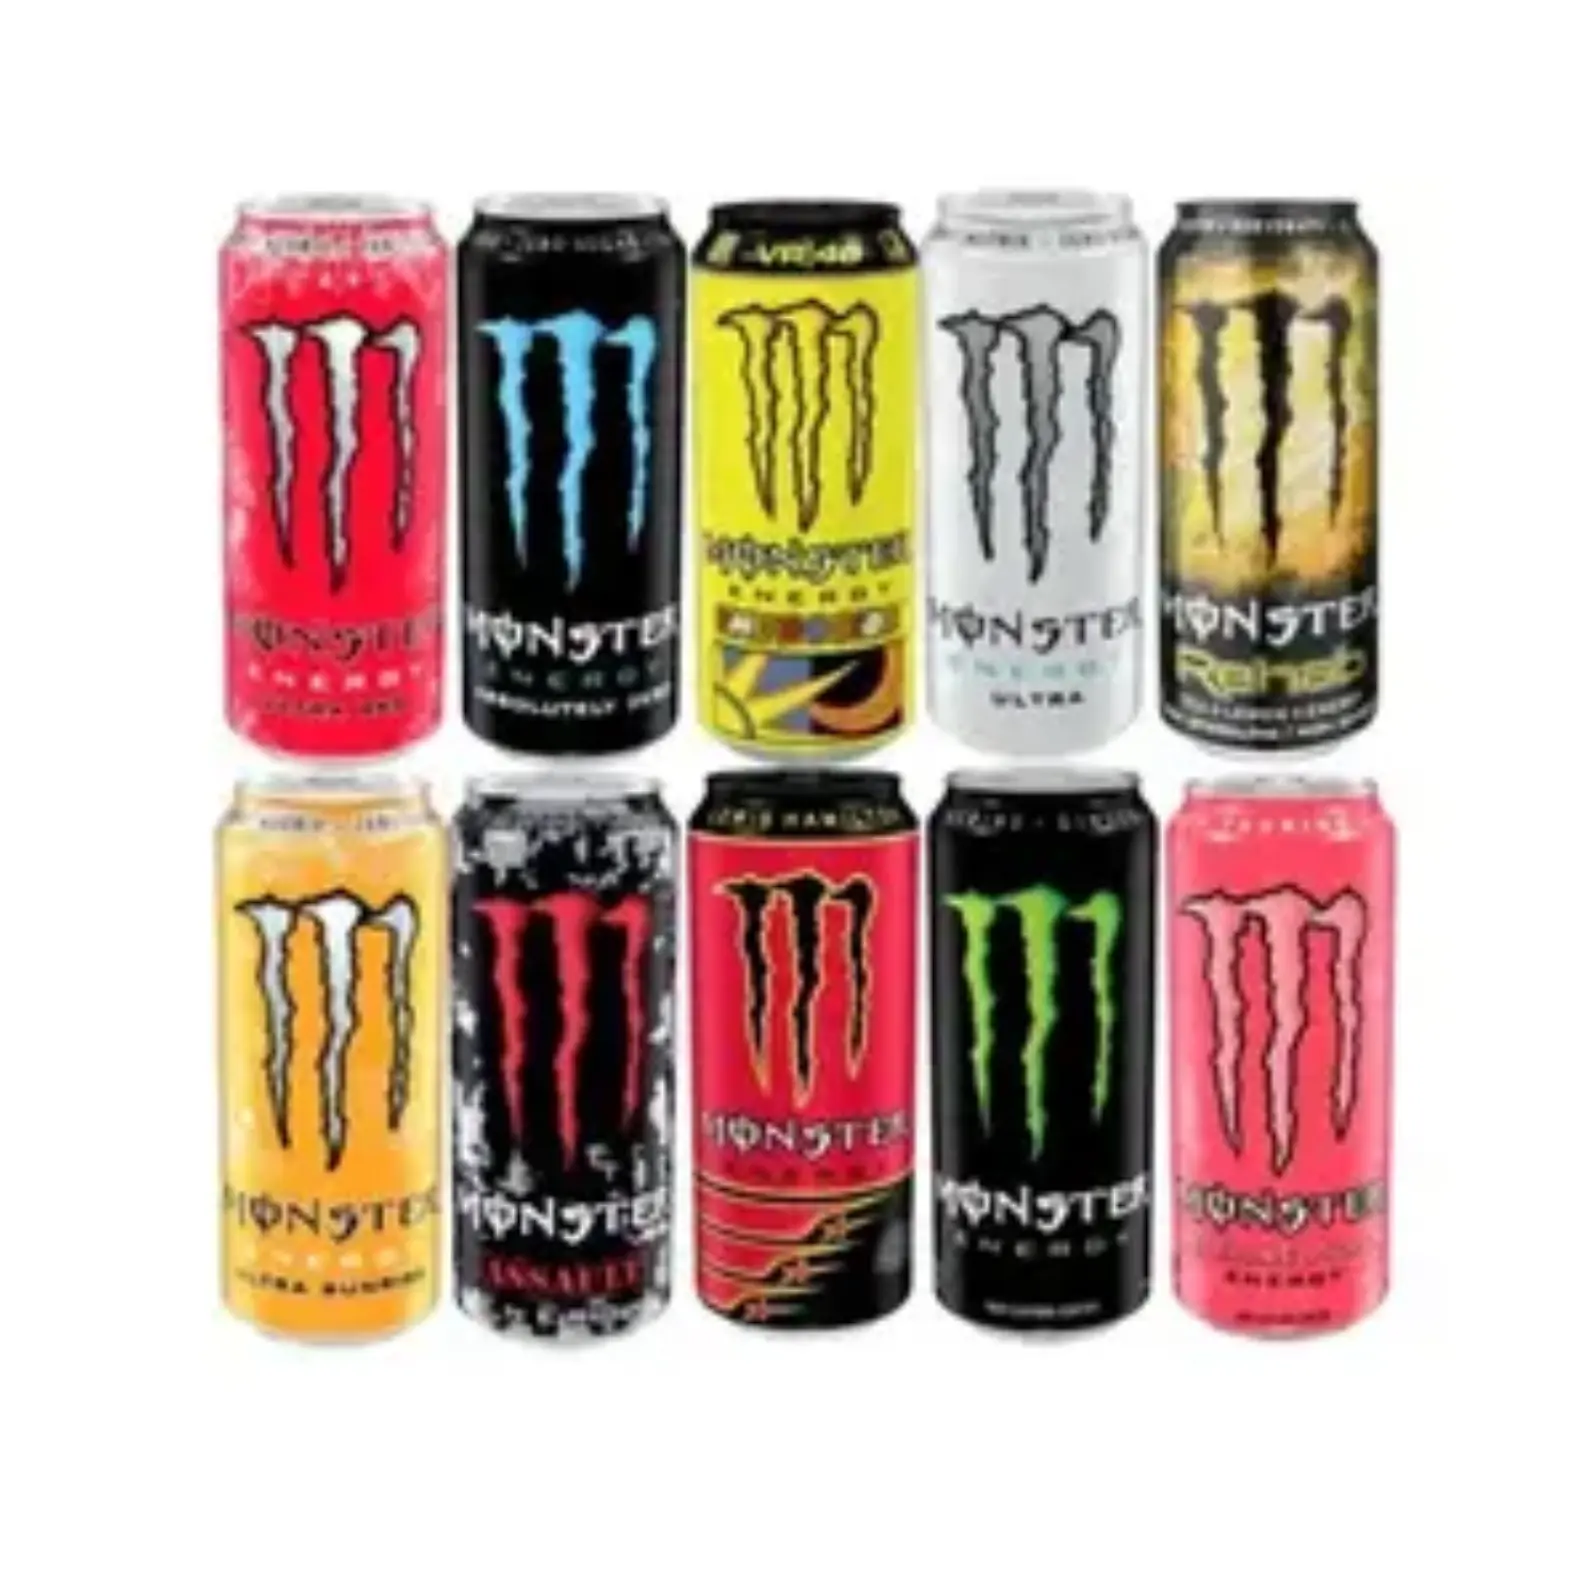 Buy Monster Energy drink all Flavors Ready stock Monster energy drink 500ML 24 Can per case